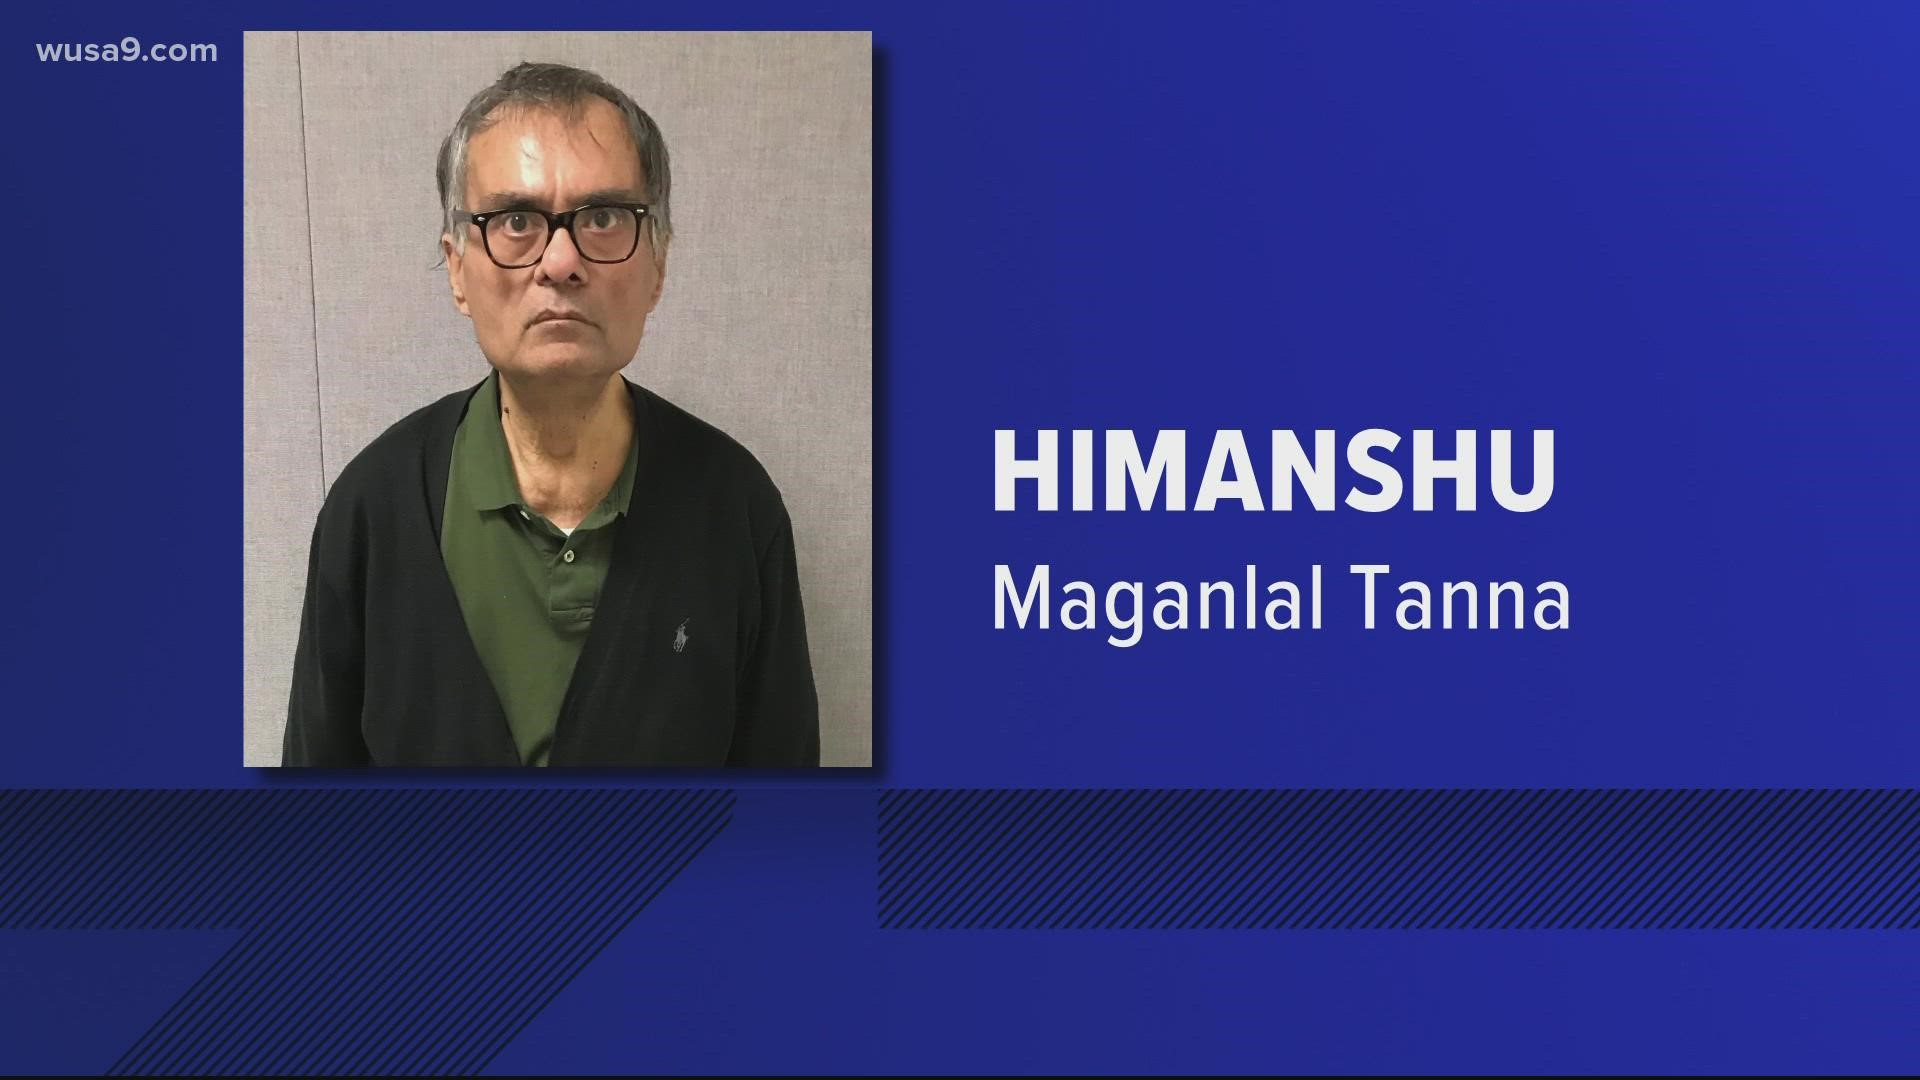 59-year-old Himanshu Maganlal Tanna of Silver Spring is accused of hitting his wife, Alka Himanshu Tanna with his car several times.